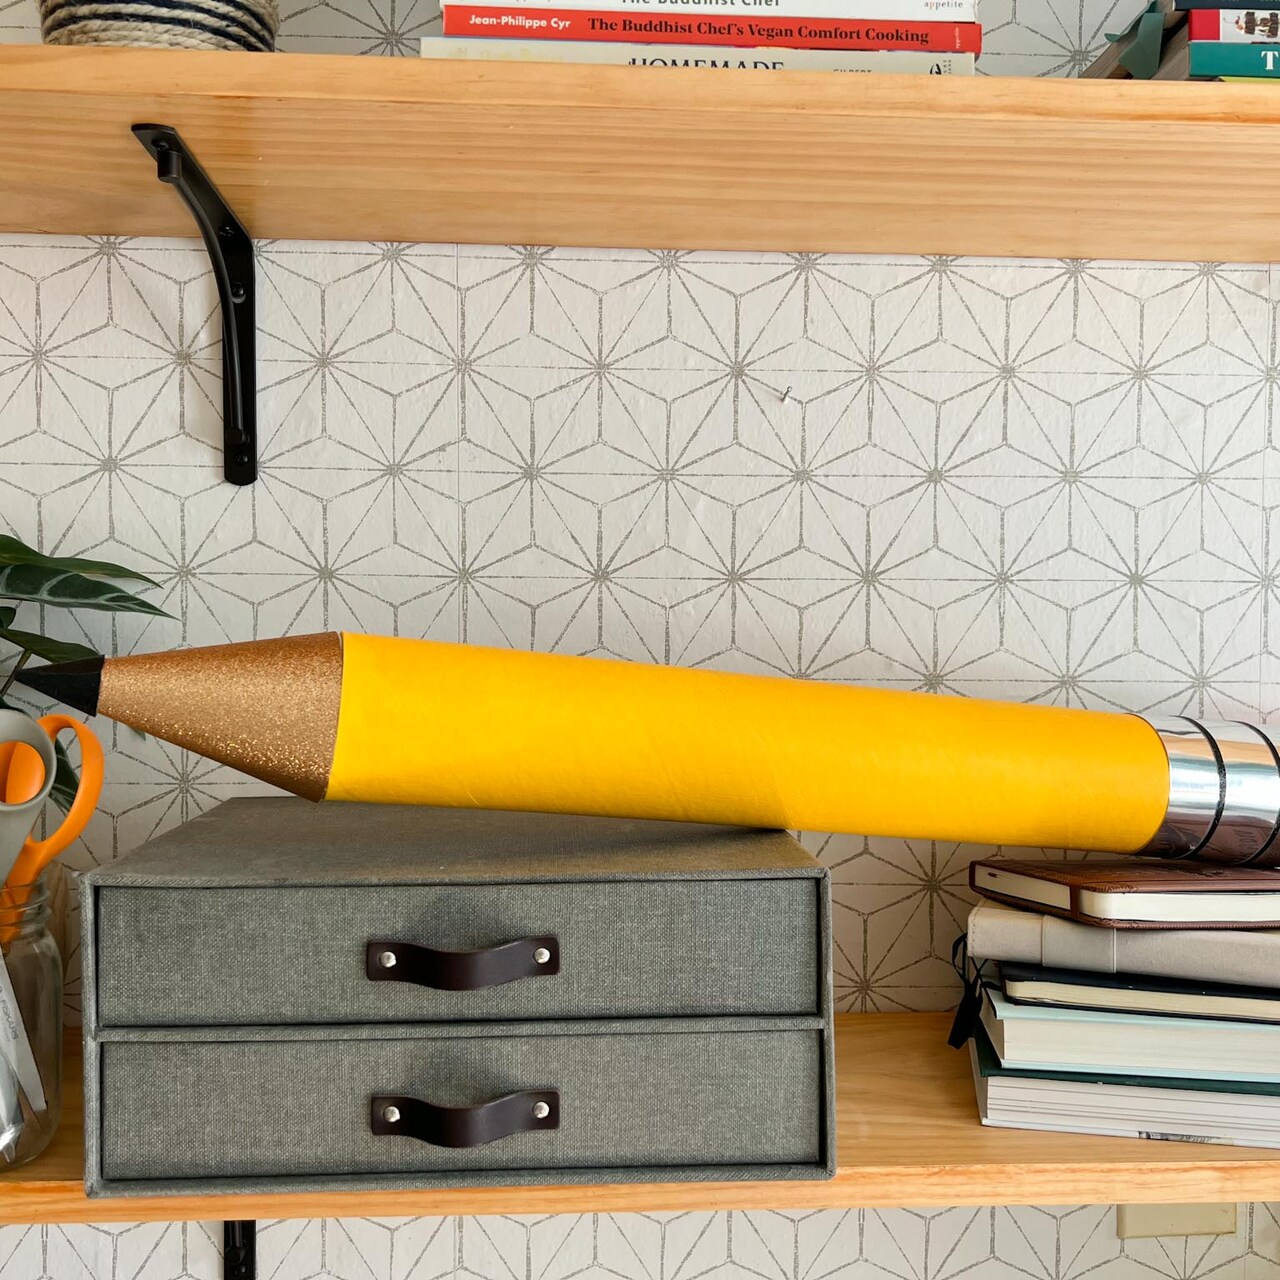 Online Class: Upcycled Giant Pencil Teacher Prop Gift with